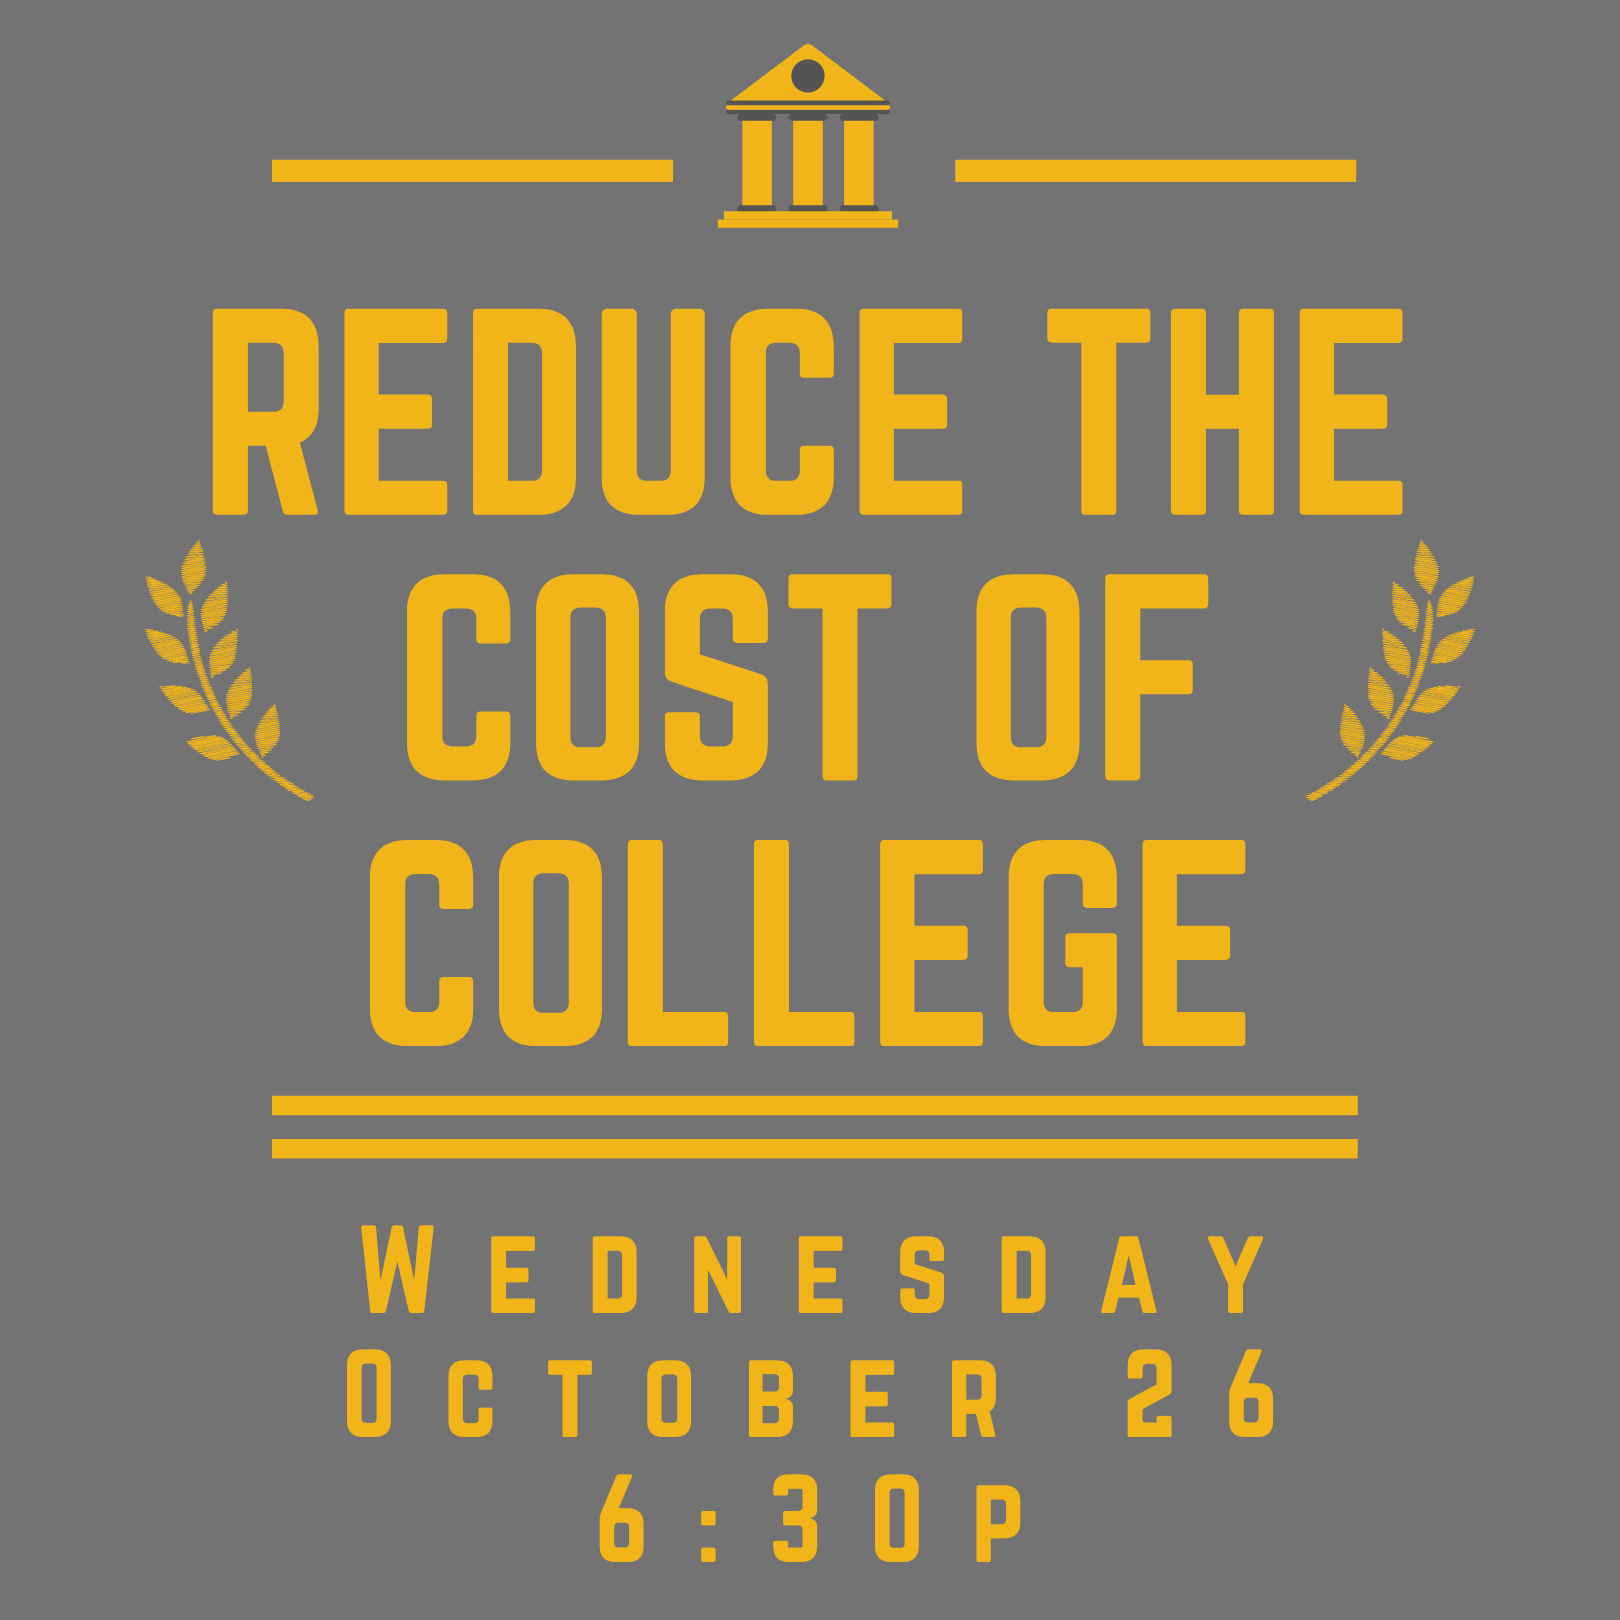 Reduce the cost of college